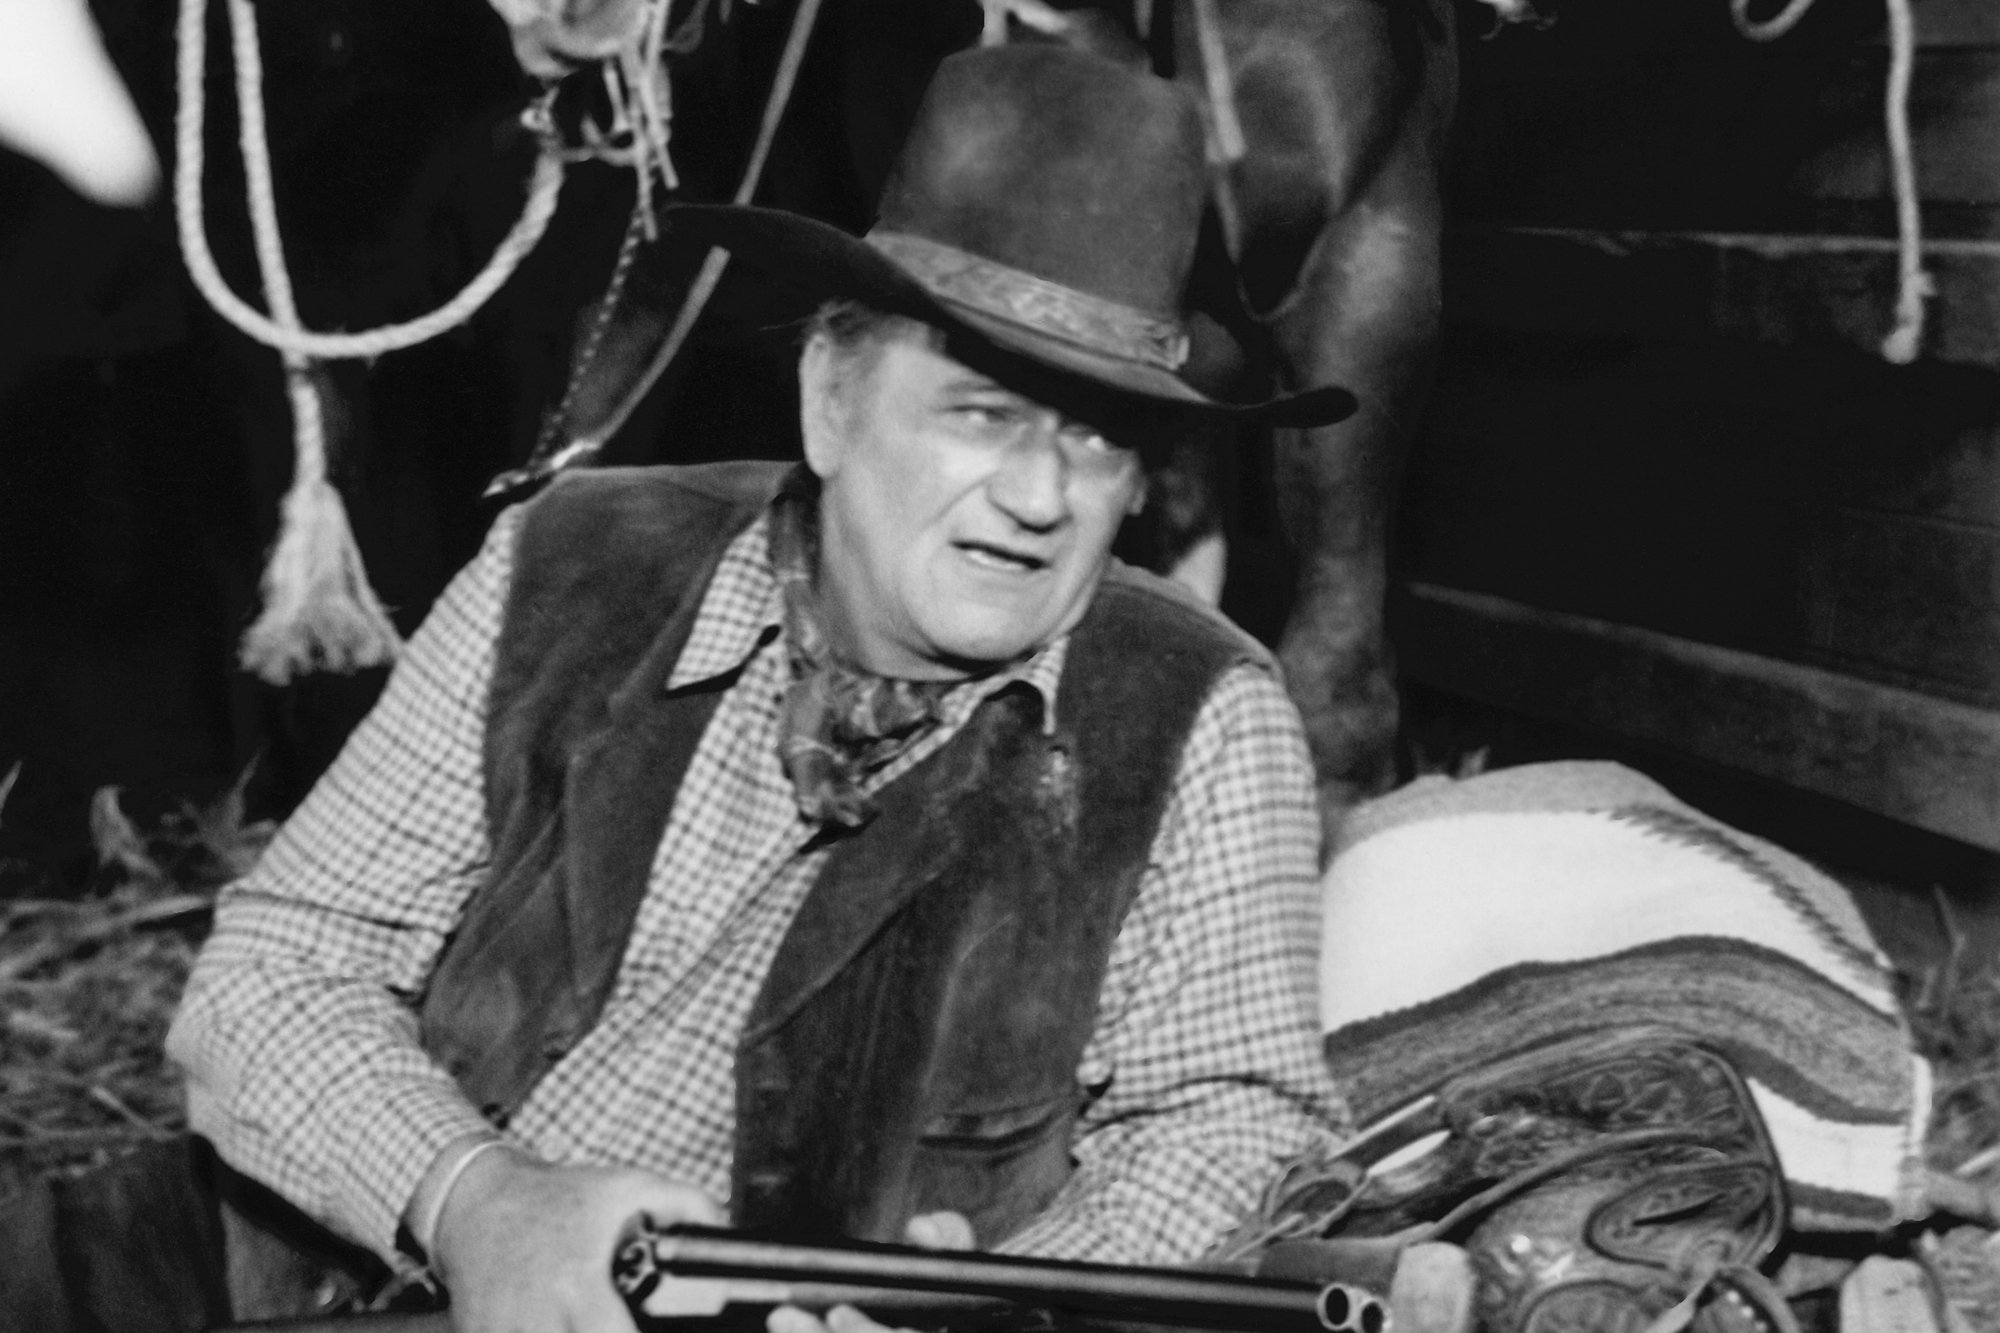 'Cahill US Marshal' John Wayne as JD Cahill wearing his Western uniform and holding a gun in front of a horse.